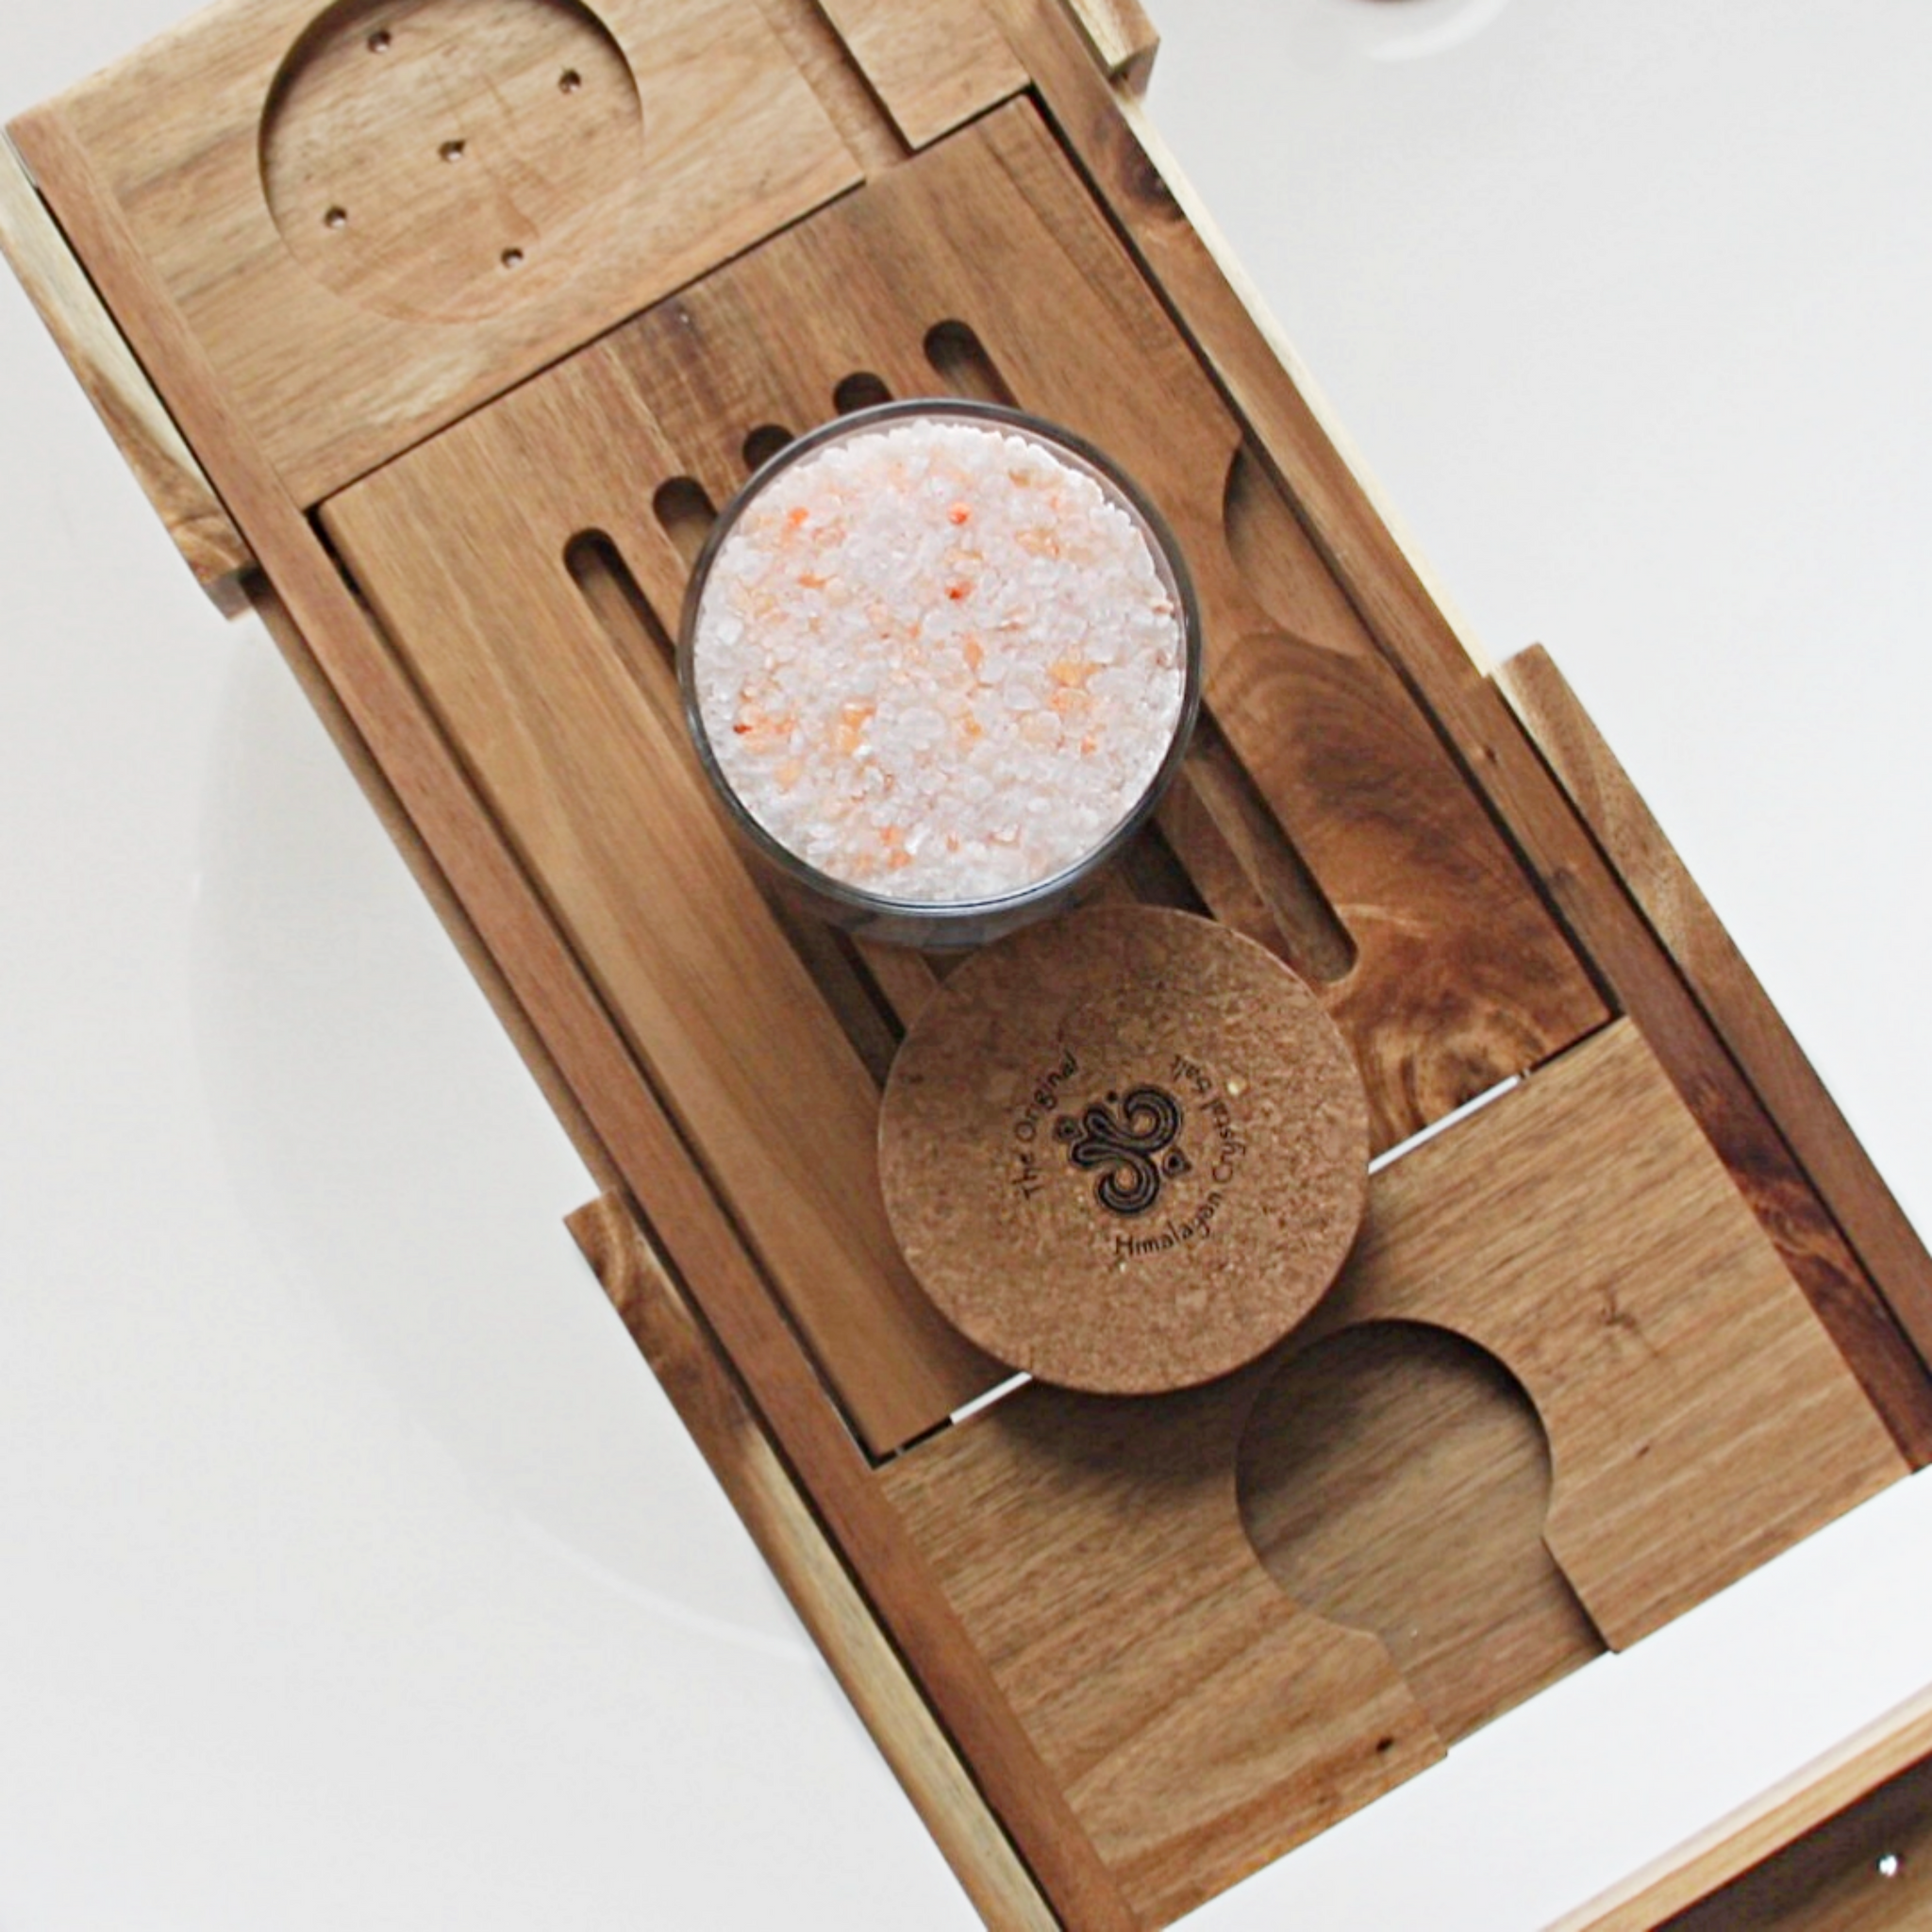 Detox Bath Salts product glass jar filled with Himalayan Crystal Salt stones with salts, cork cover  resting on wooden tray with slats and candle holder groove resting on white tub